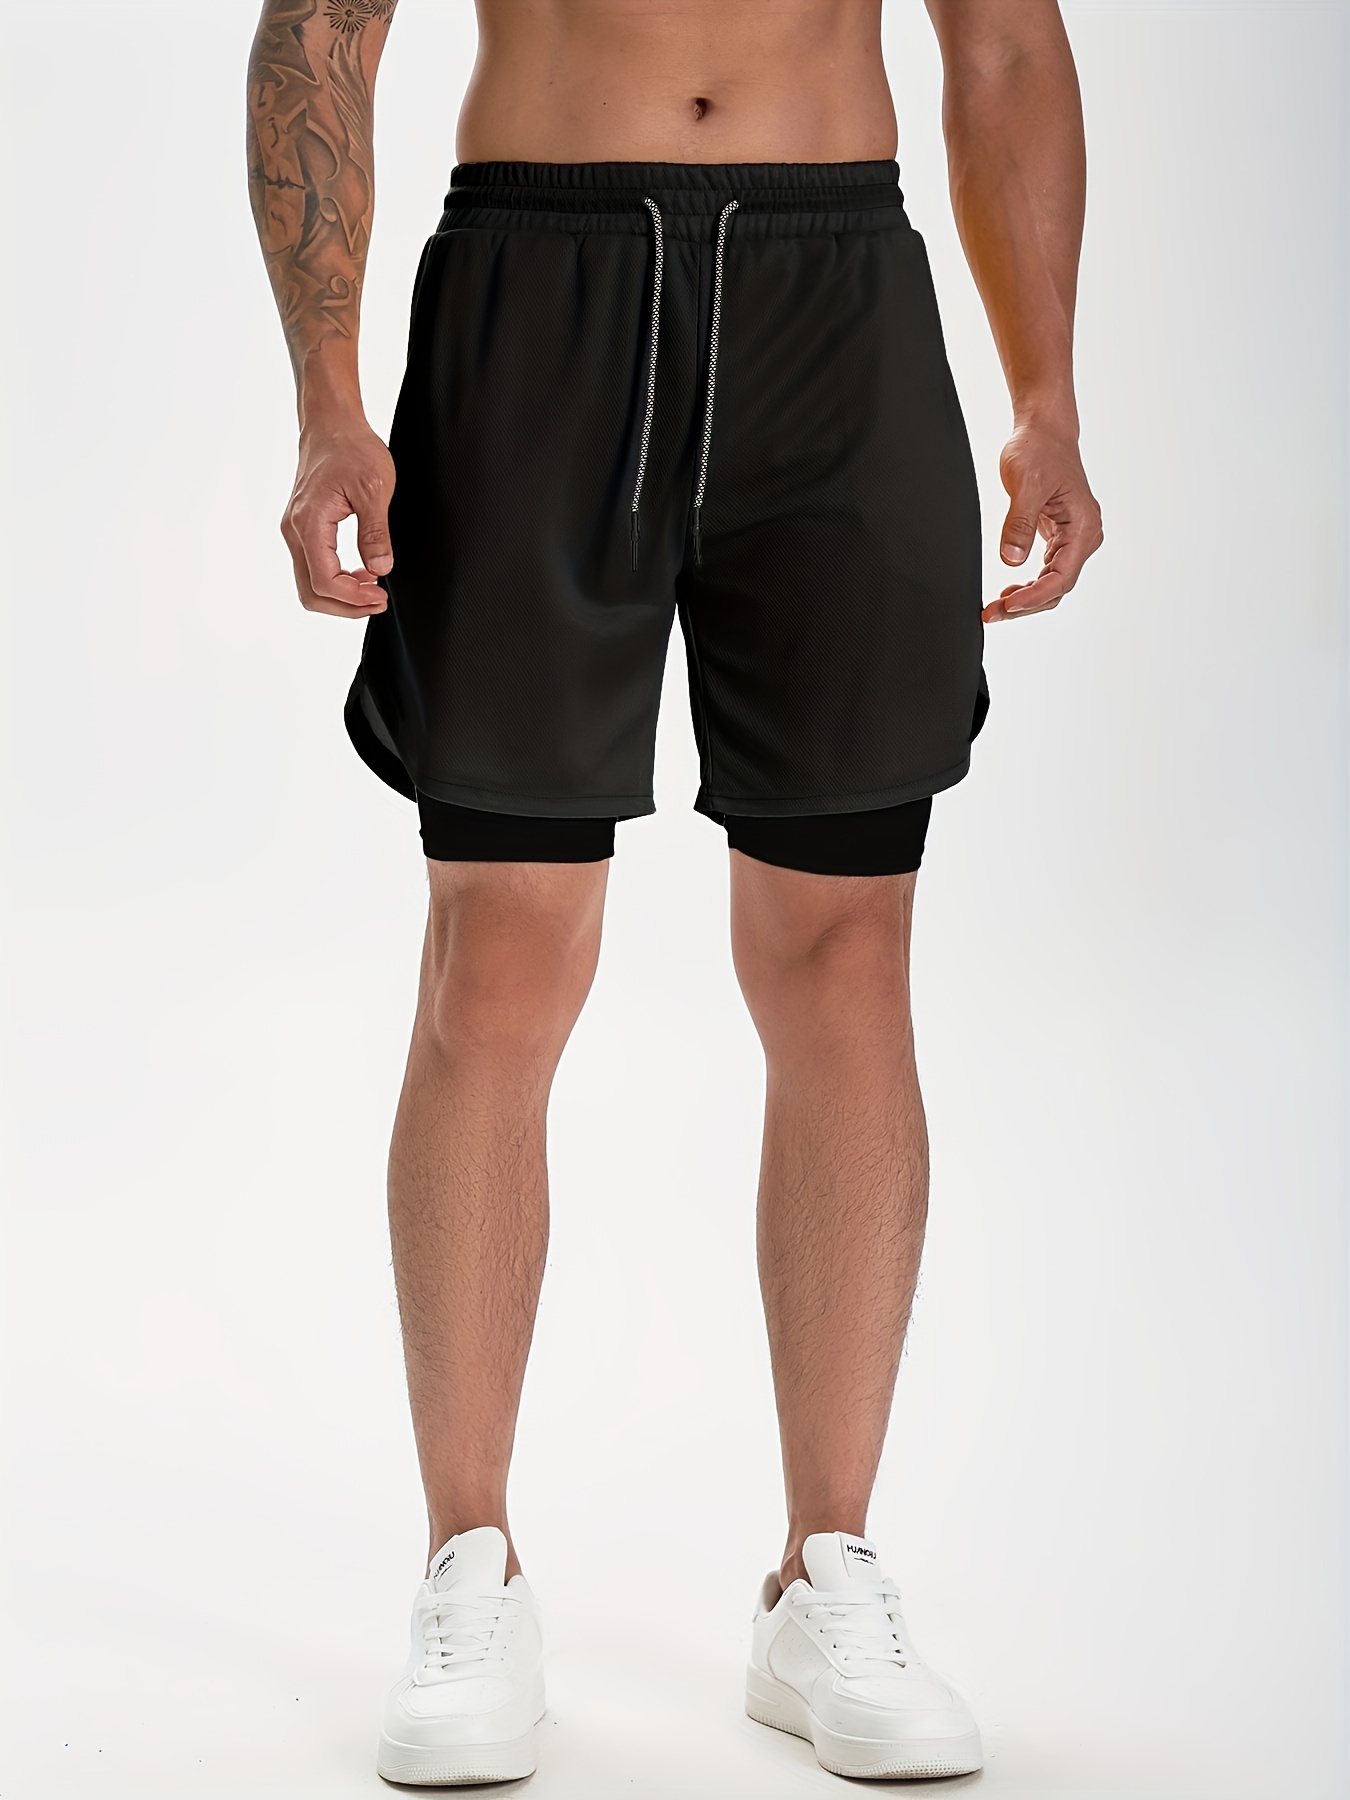 2 In 1 Running Shorts with Phone Pocket Gym Workout Quick Dry Mens Shorts 5  Inch 